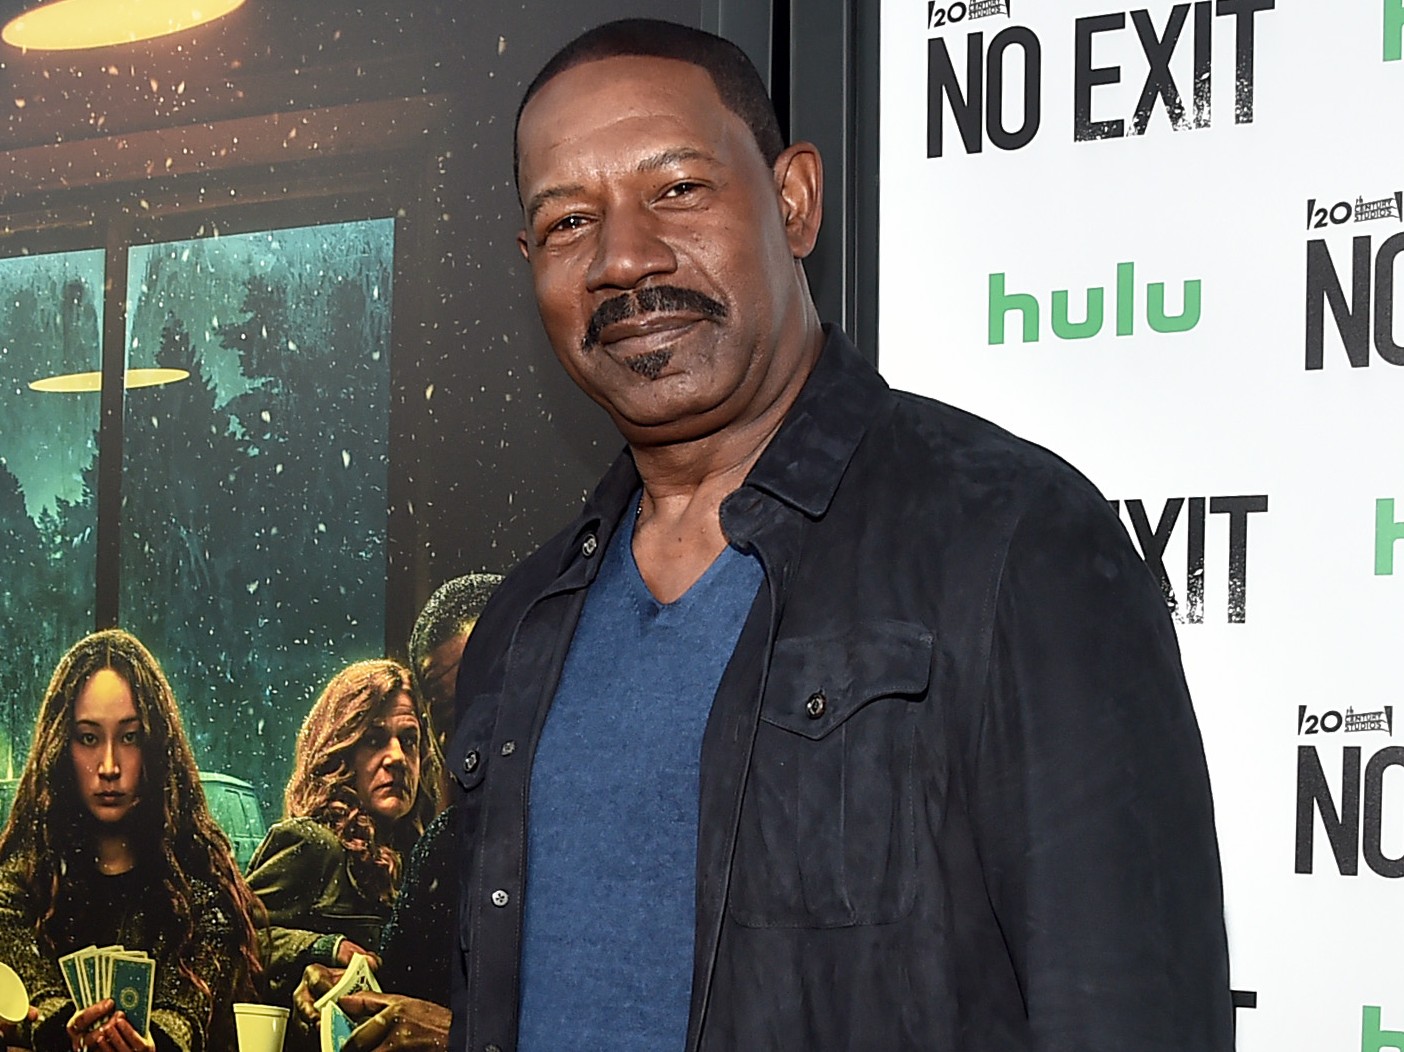 Dennis Haysbert on the red carpet wearing blue top and black jacket